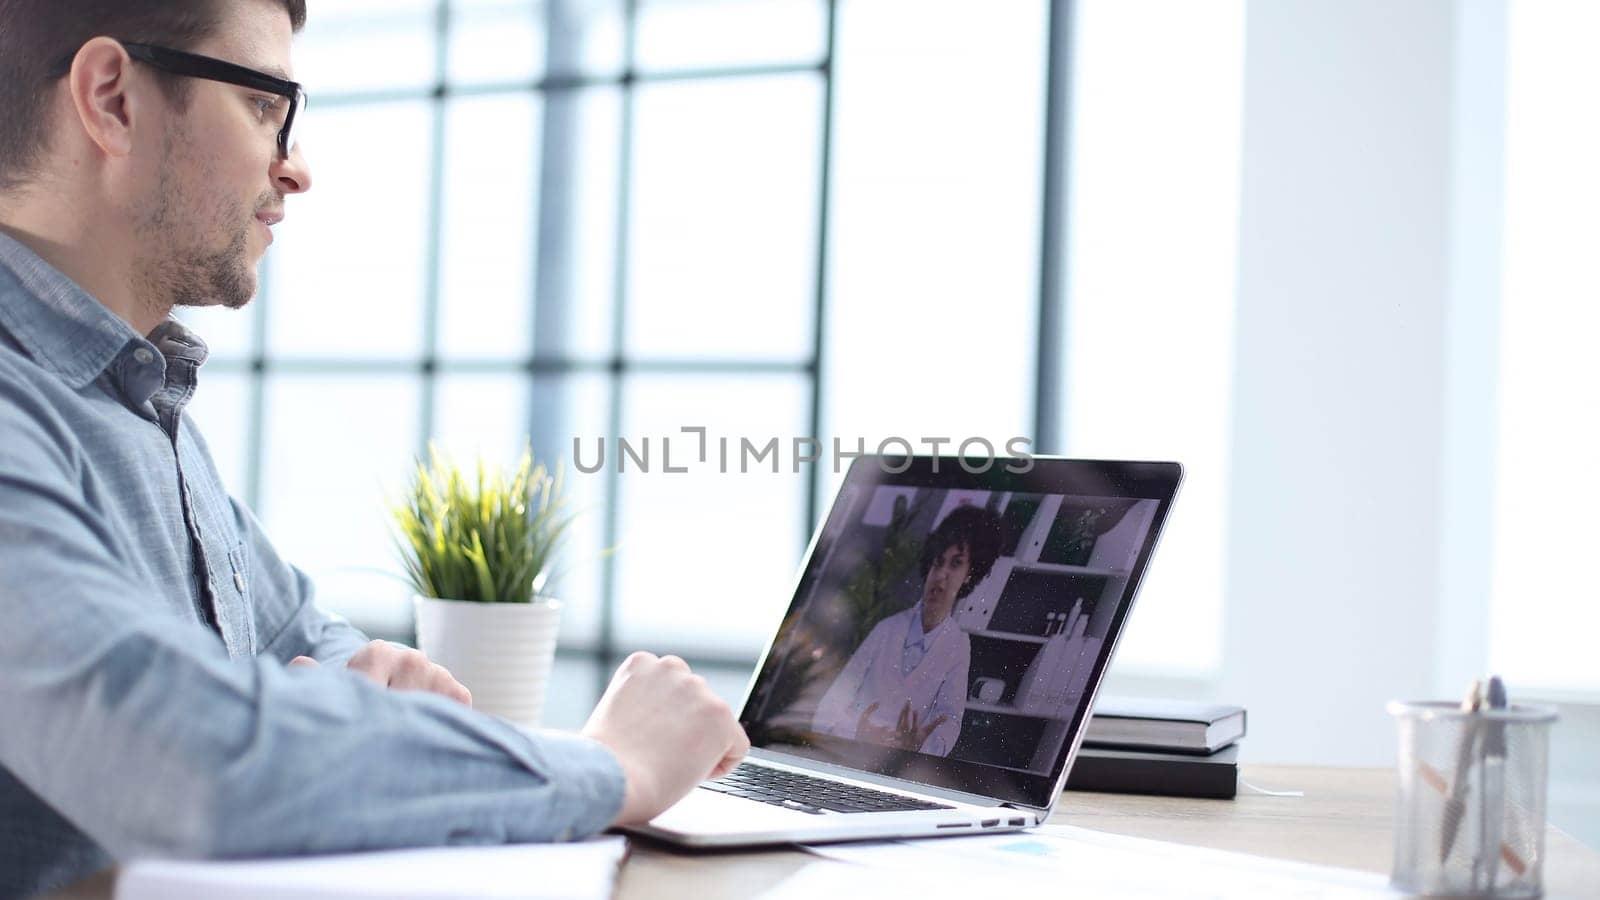 A male office worker at an online meeting with colleagues by Prosto